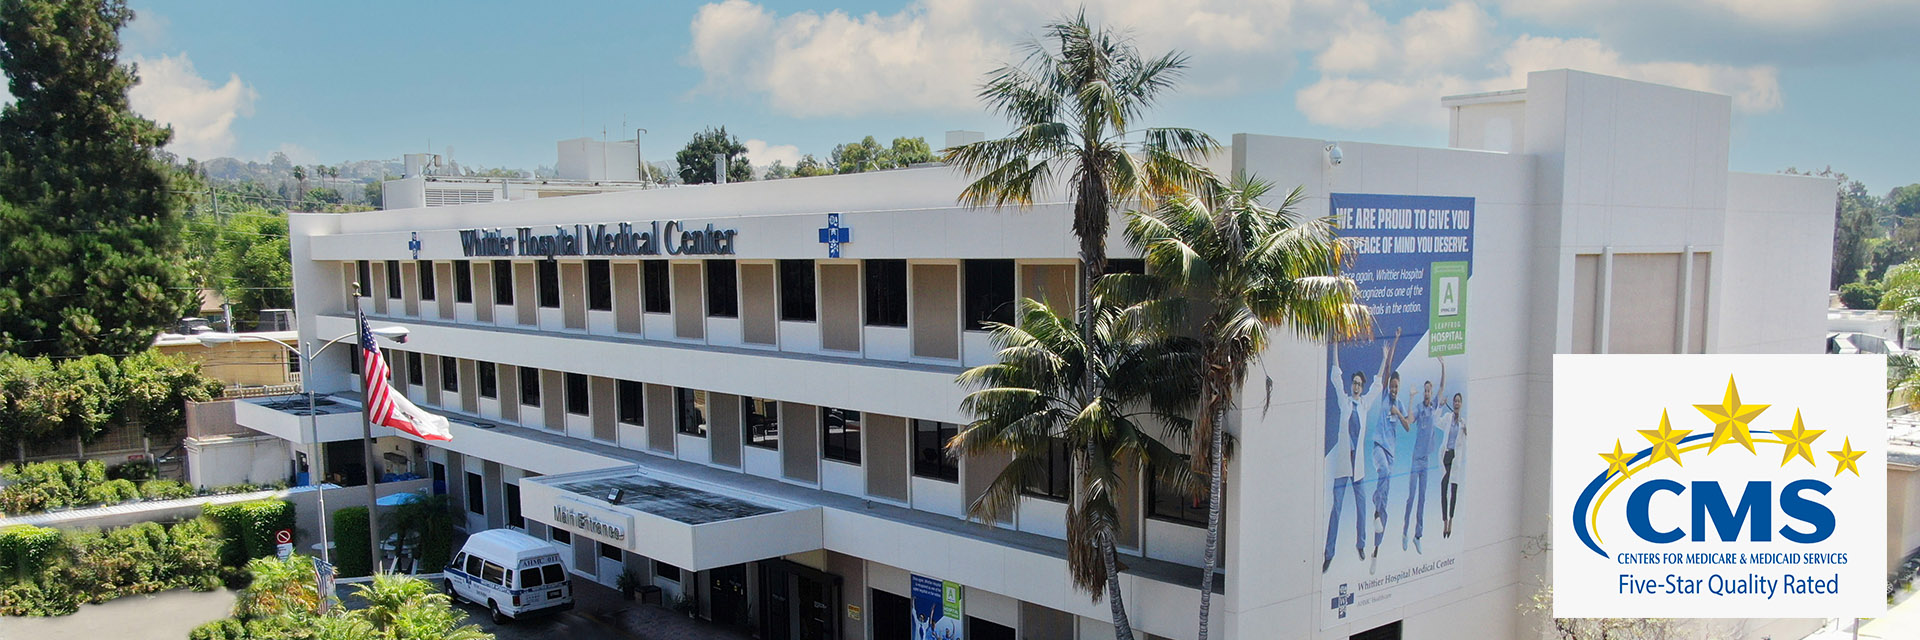 Whittier Hospital Medical Center
CMS
CENTERS FOR MEDICARE AND MEDICAID SERVICES
FIVE-STAR QUALITY RATED